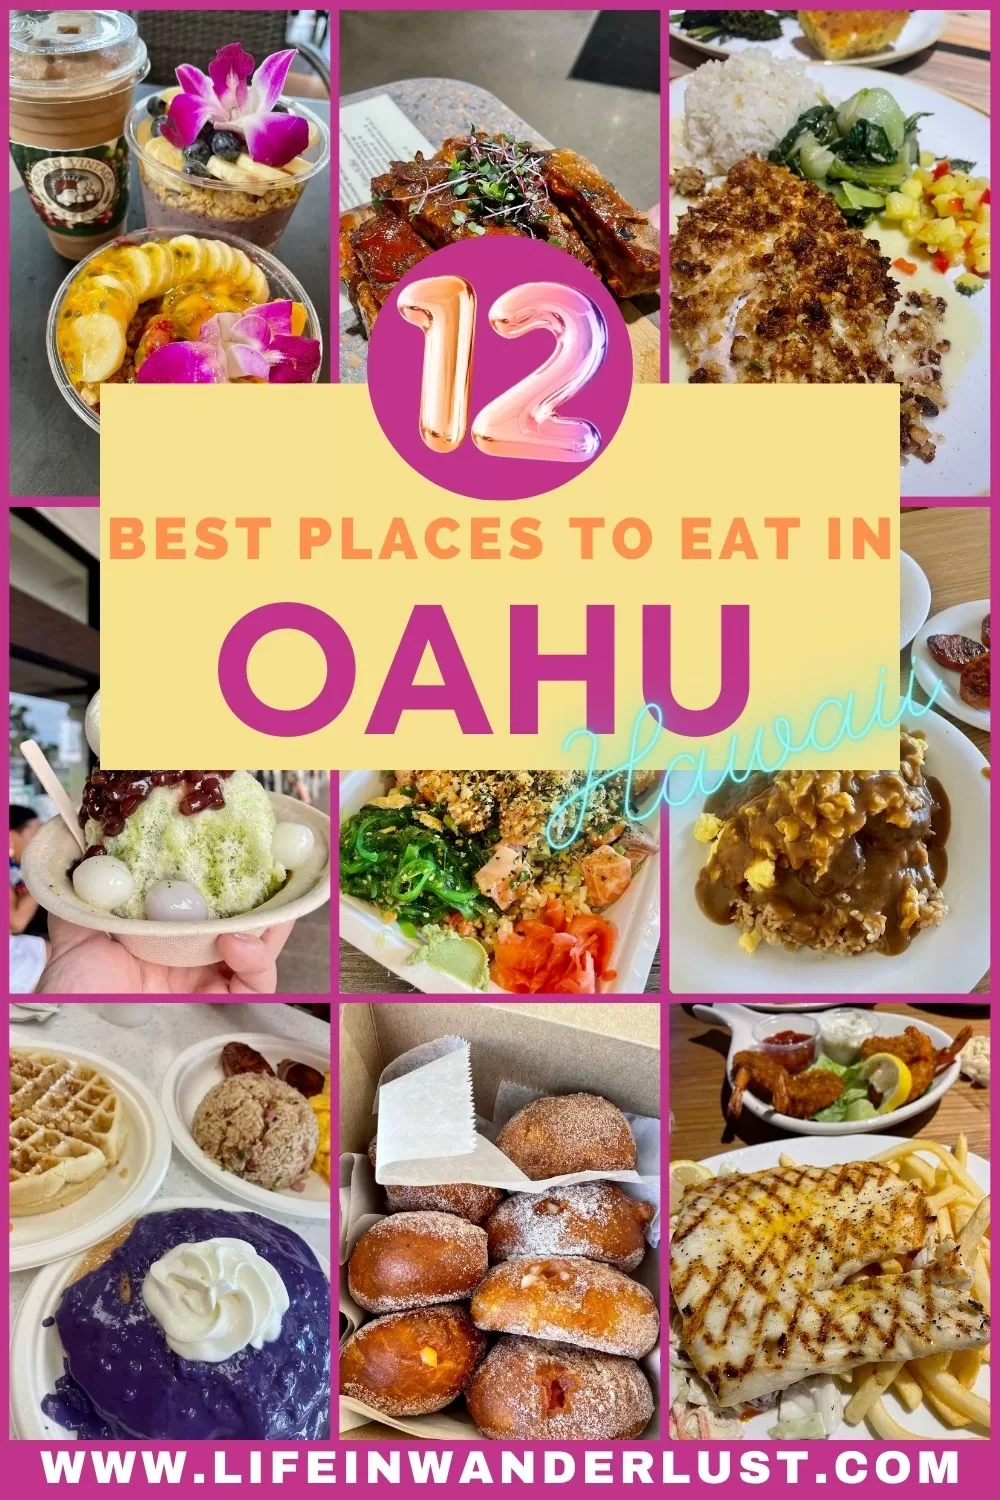 Best Places to Eat in Oahu